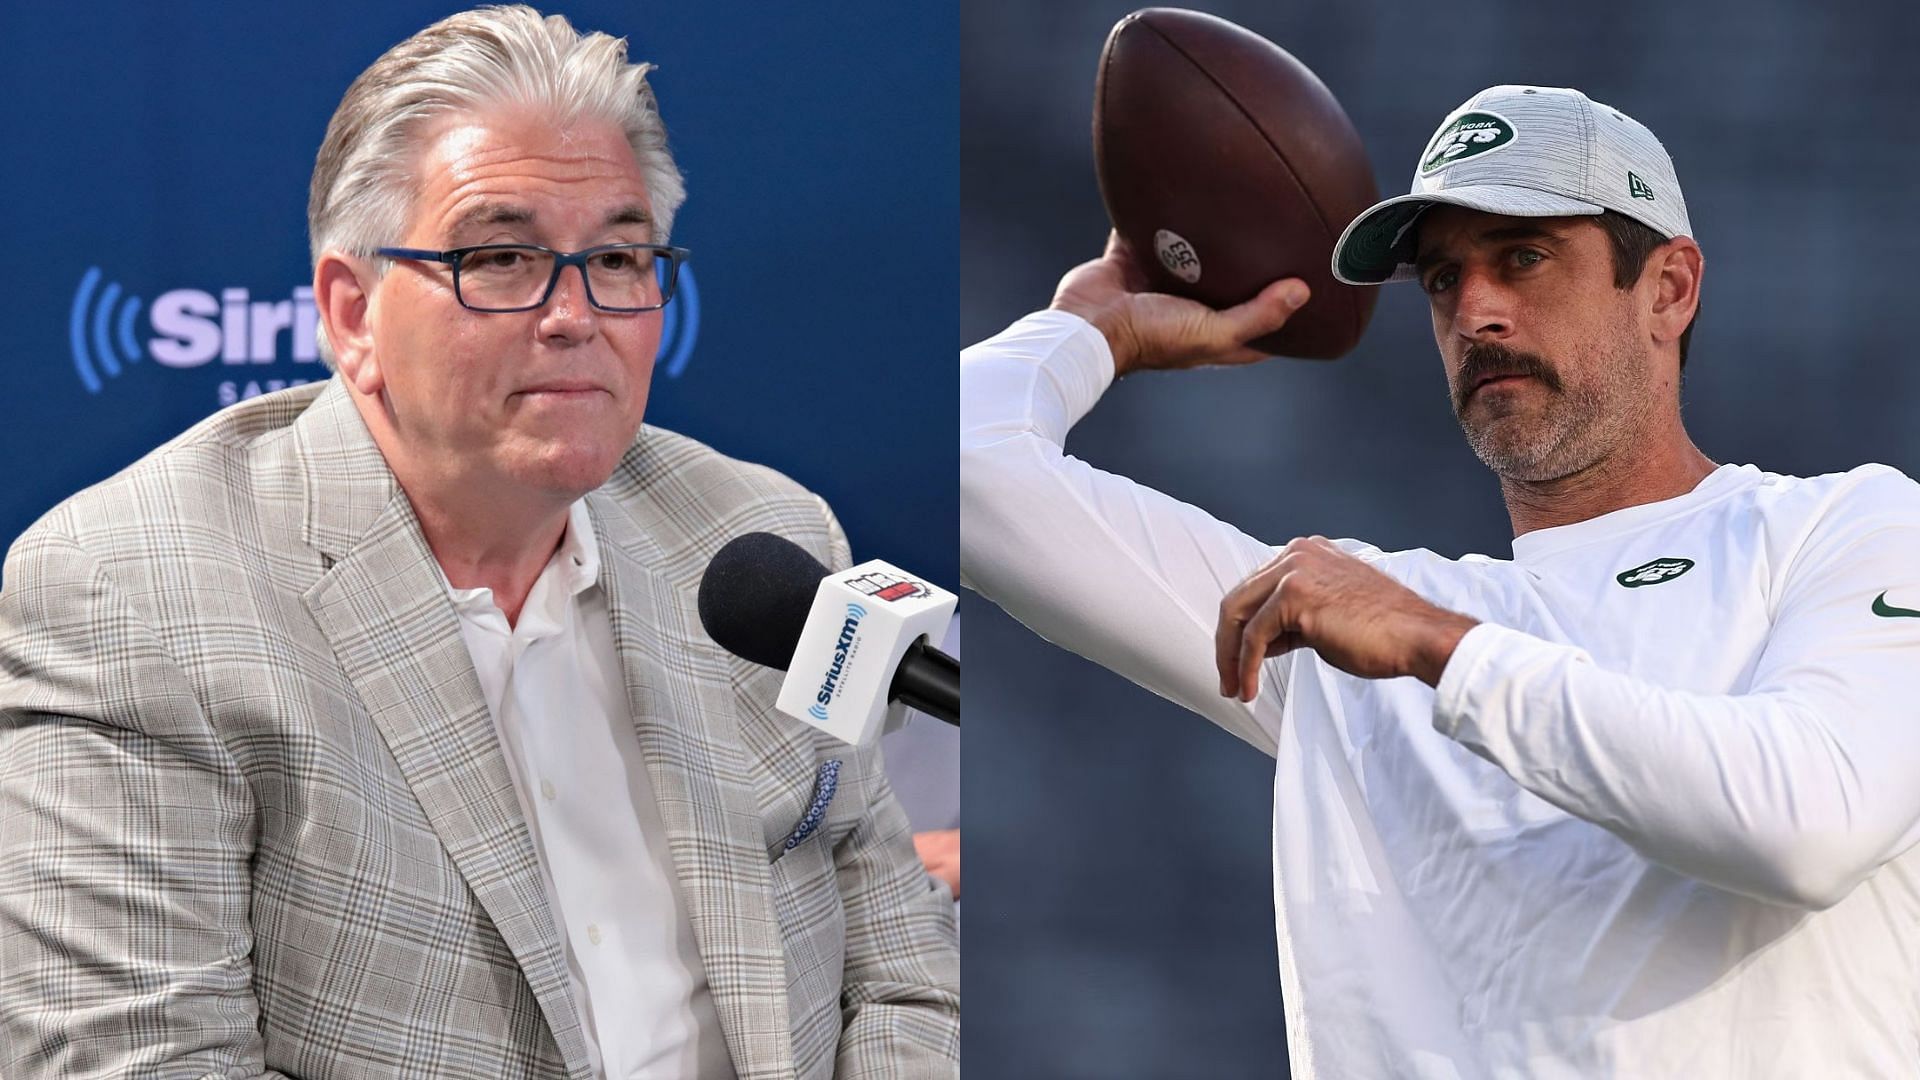 Veteran sports media personality Mike Francesa criticized the 2023 training camp edition of Hard Knocks featuring Aaron Rodgers and the New York Jets. (Image credit: Cindy Ord/Getty Images)